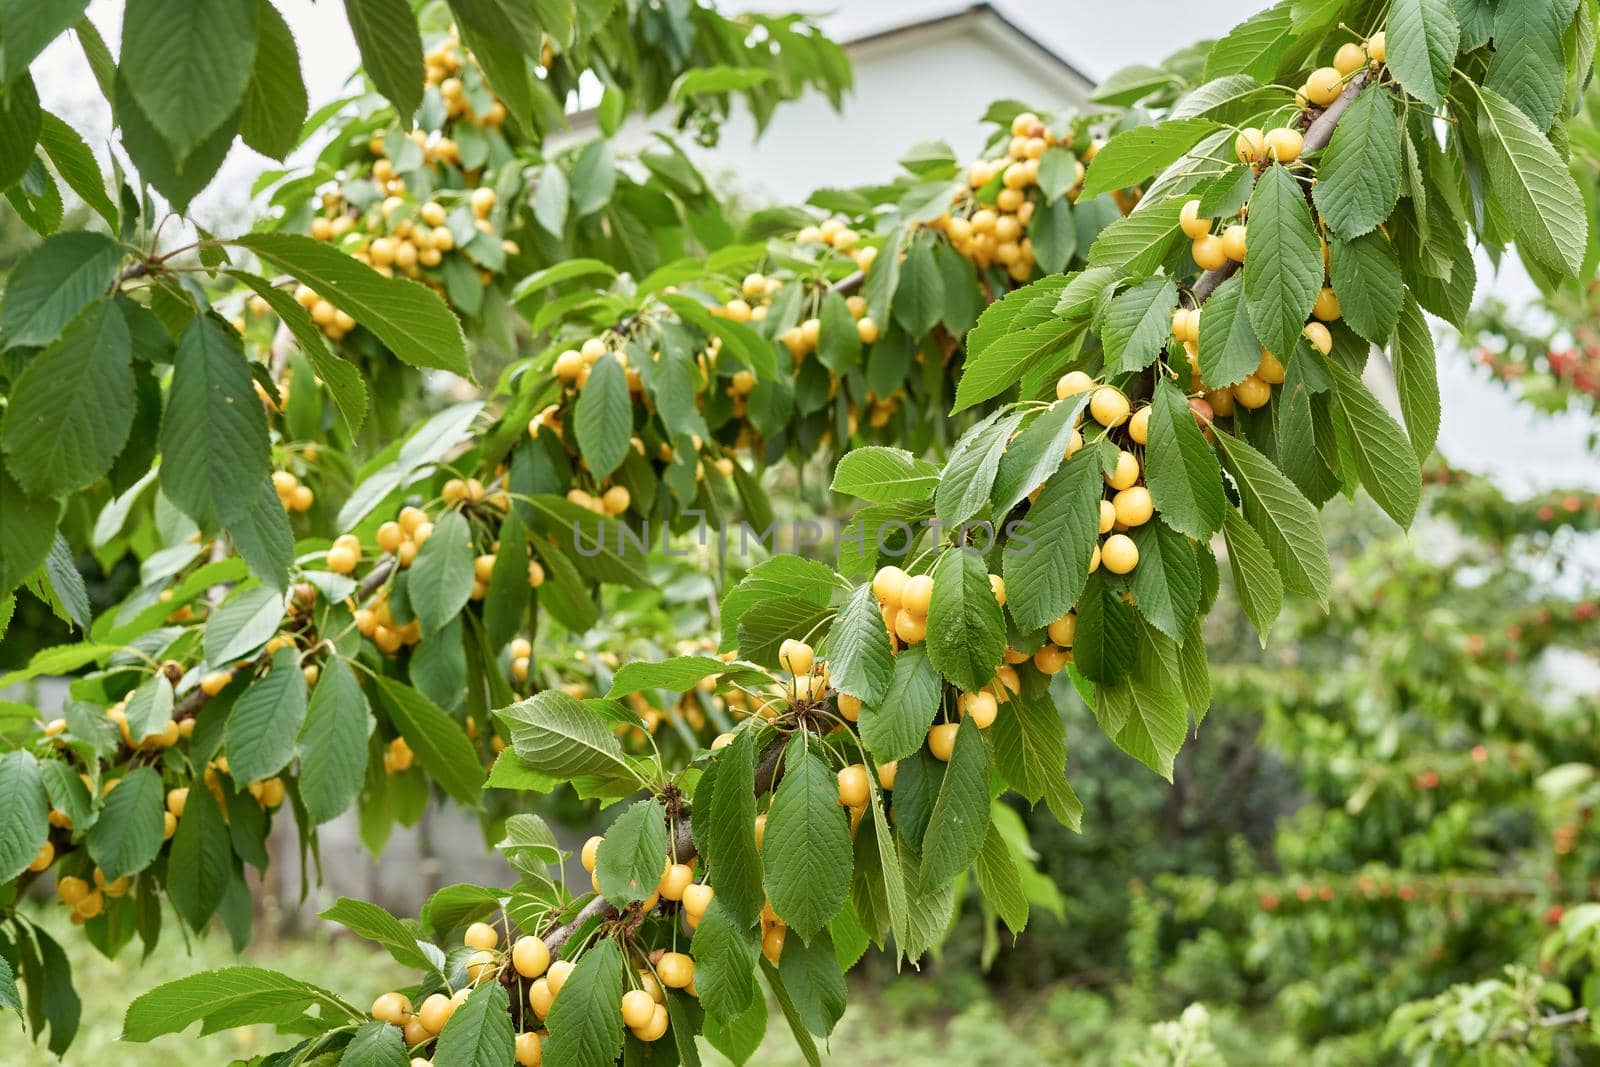 Many yellow cherries on the branches of a tree with green leaves. Cherry berry harvest